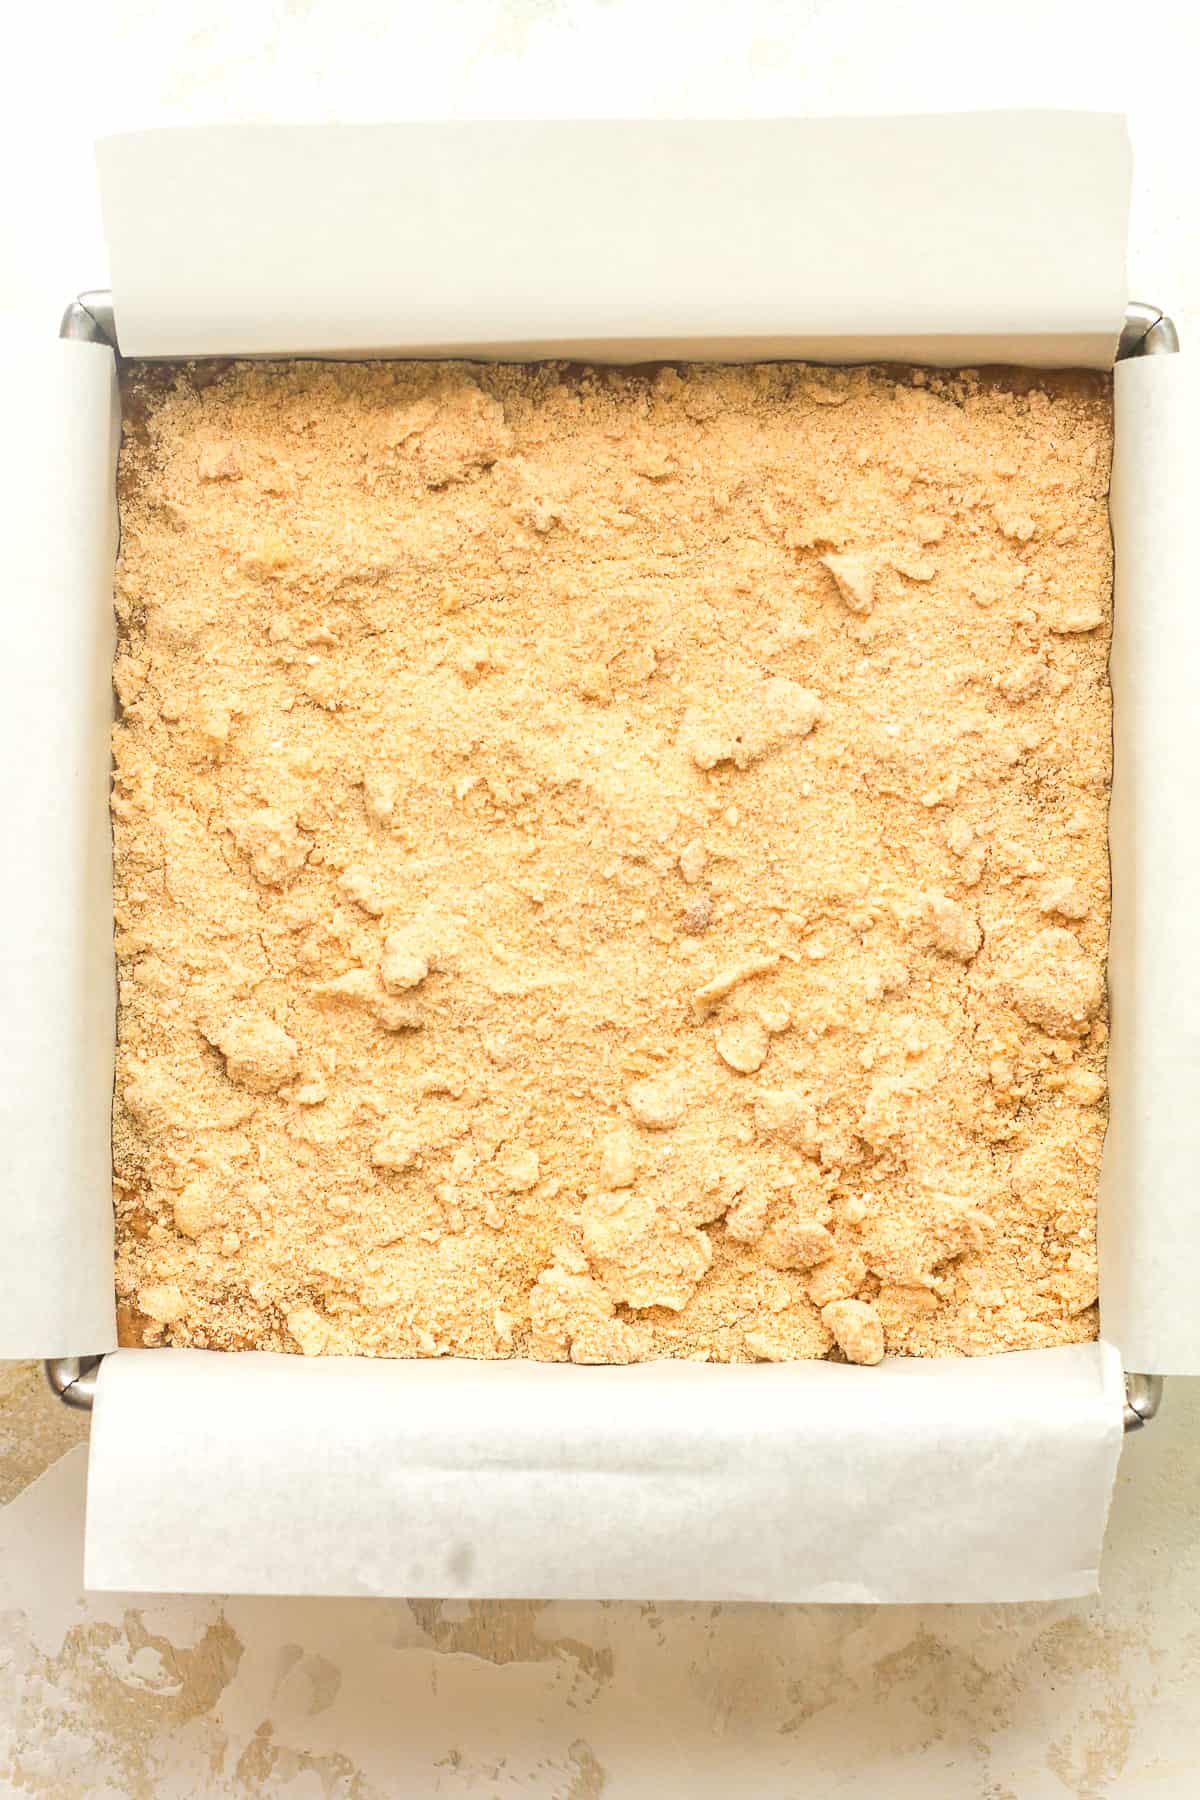 A square pan of the cake batter plus streusel on top.